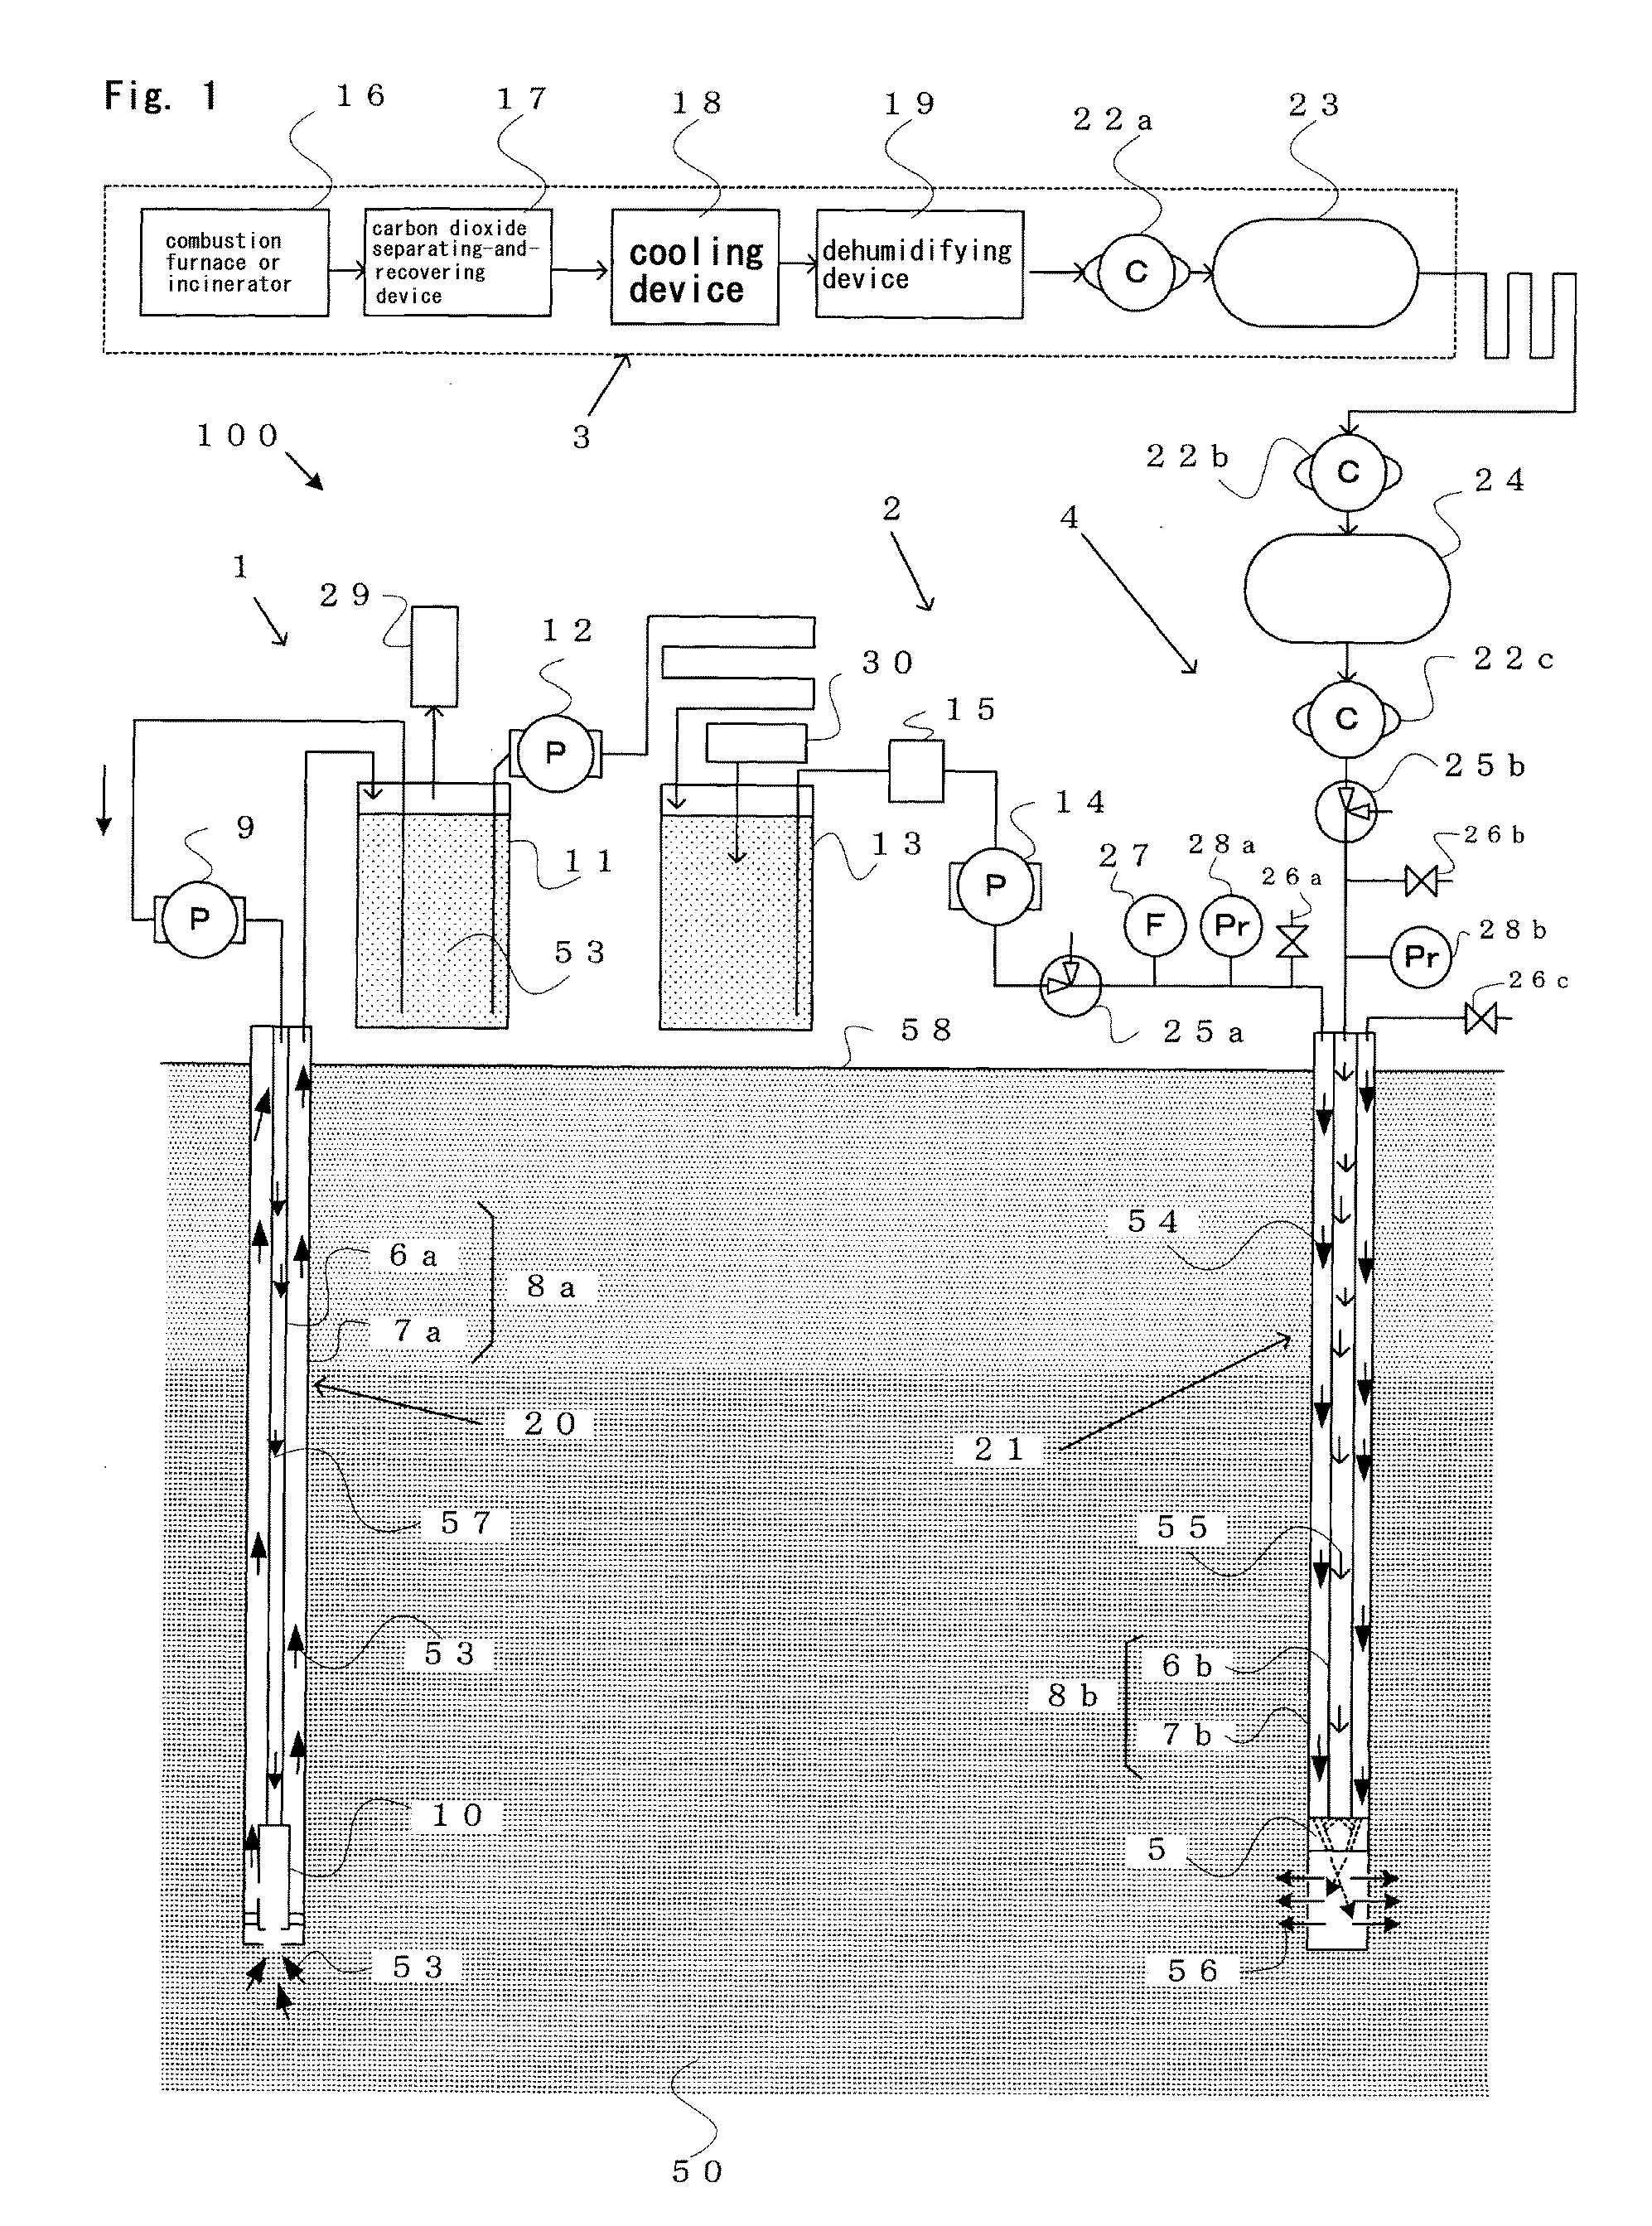 System for treating carbon dioxide, and method for storing such treated carbon dioxide underground